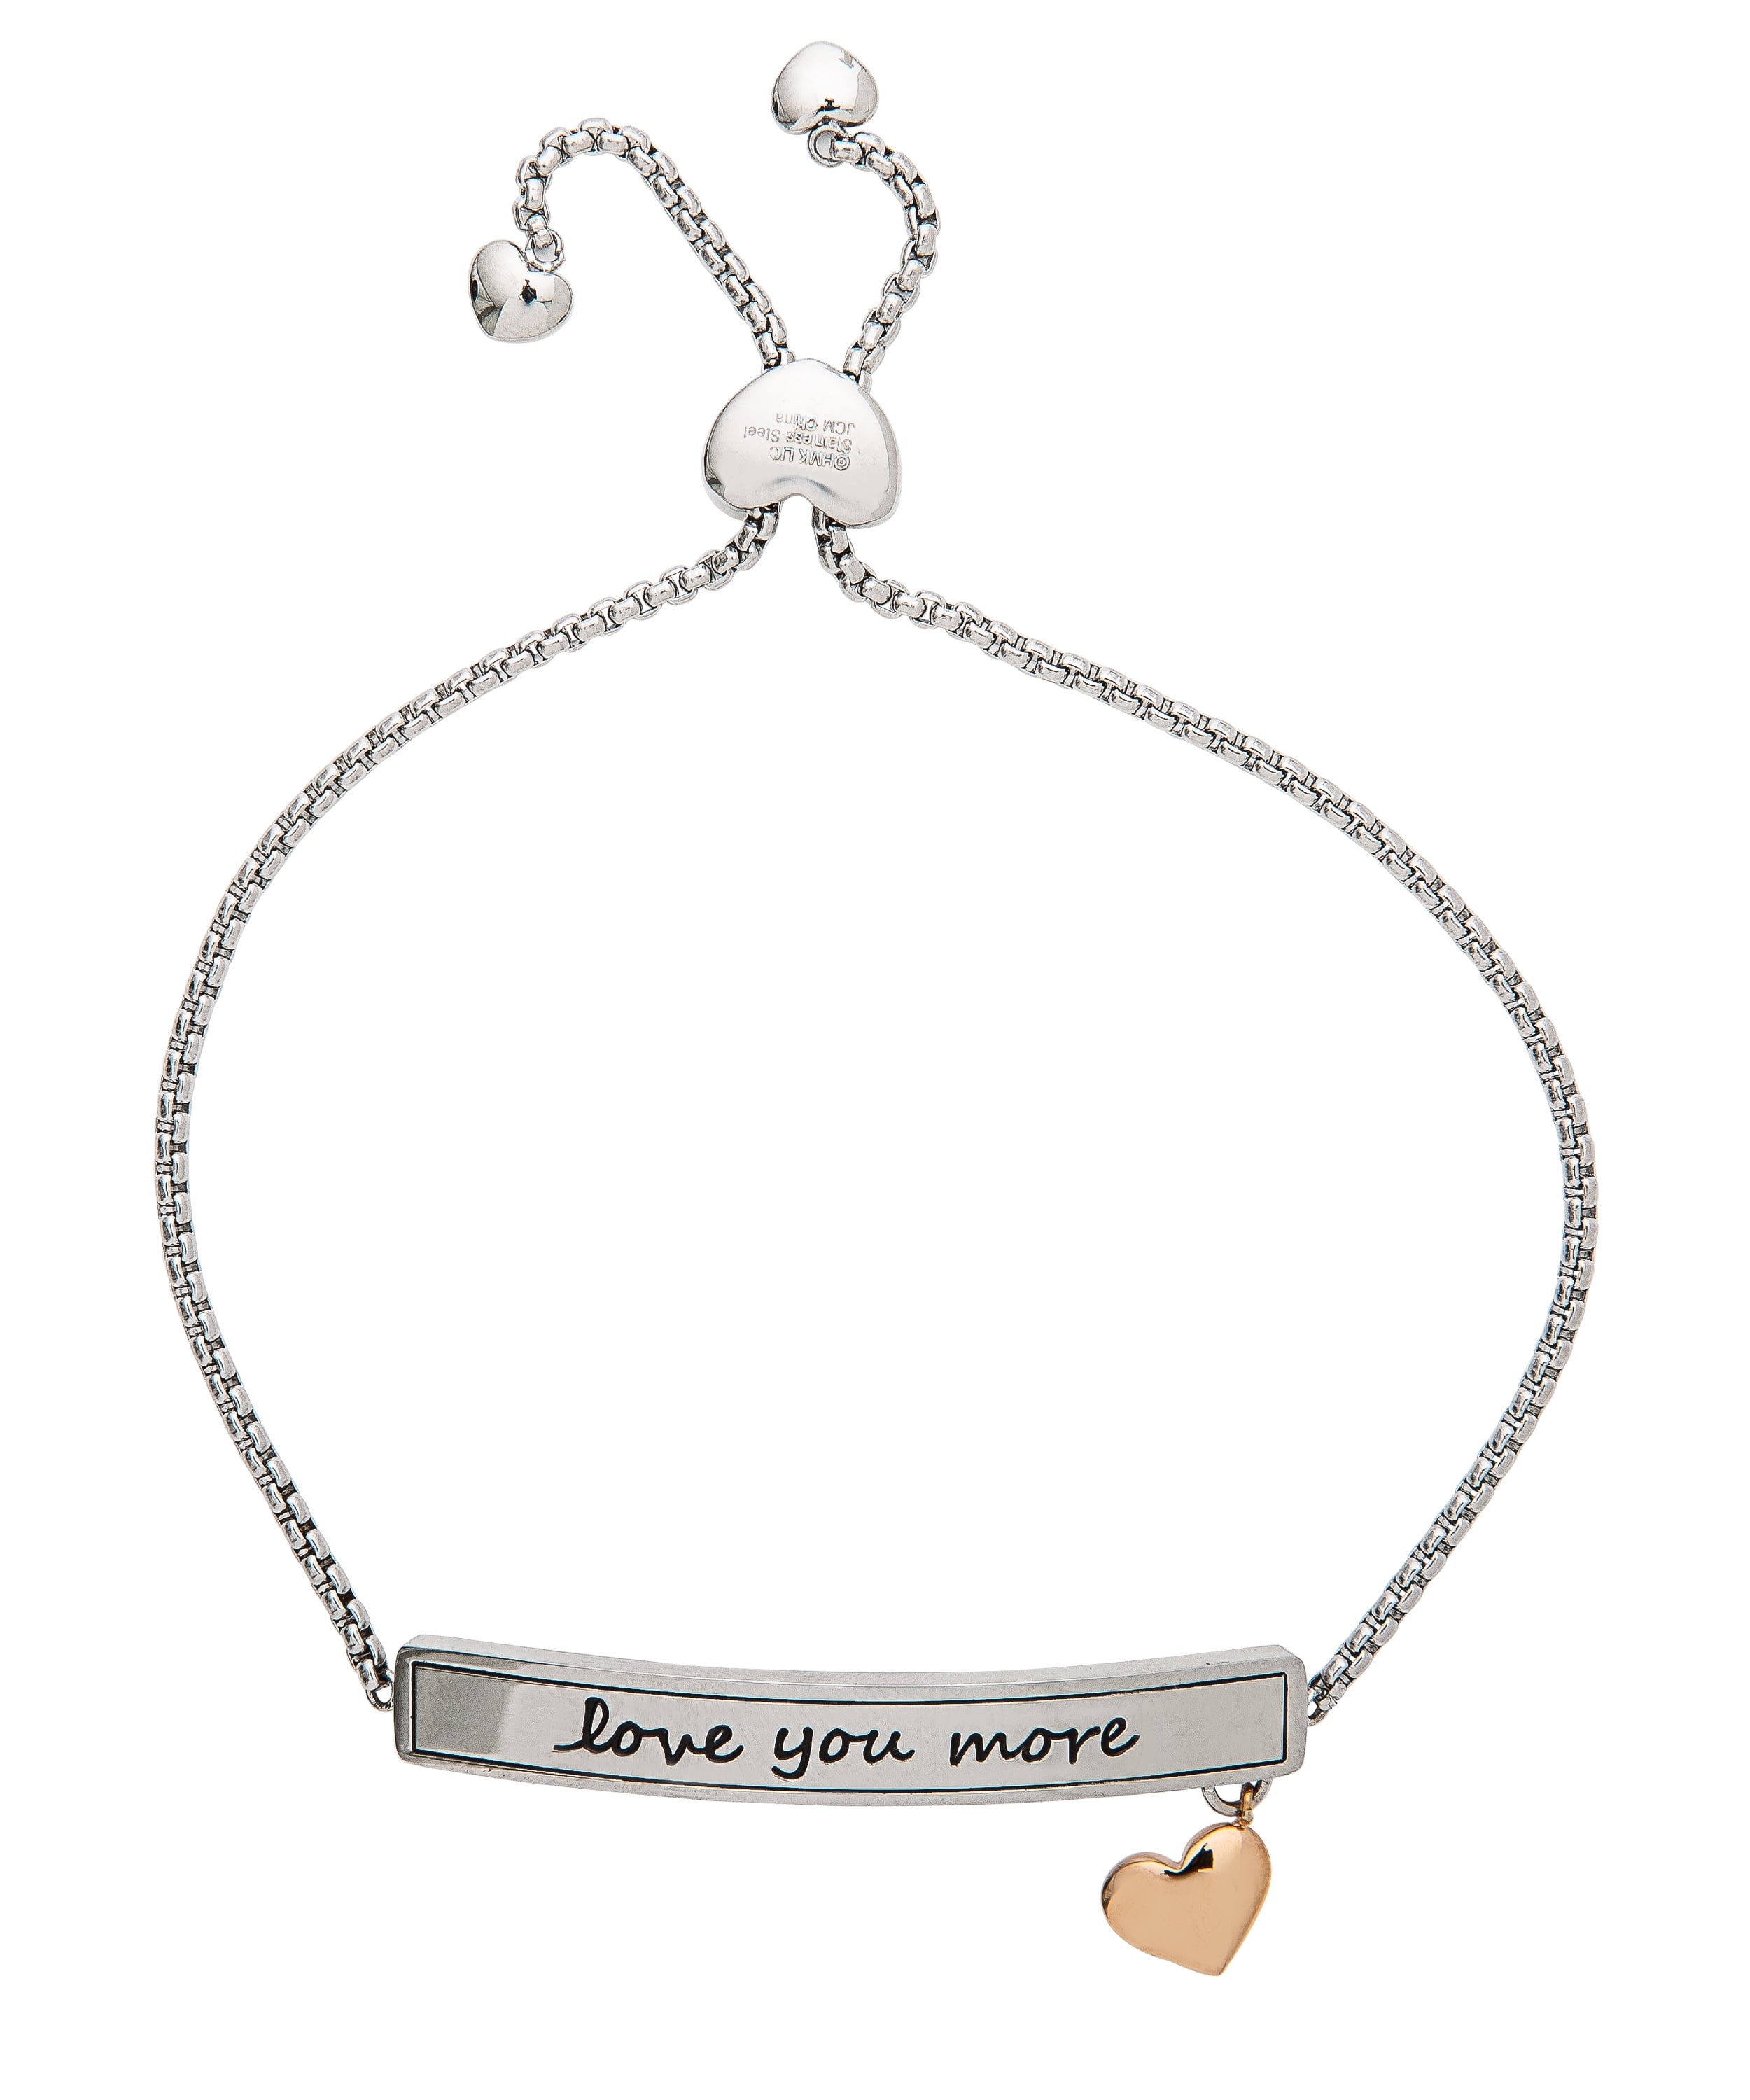 Connections From Hallmark Stainless Steel Love Charm Bracelet 